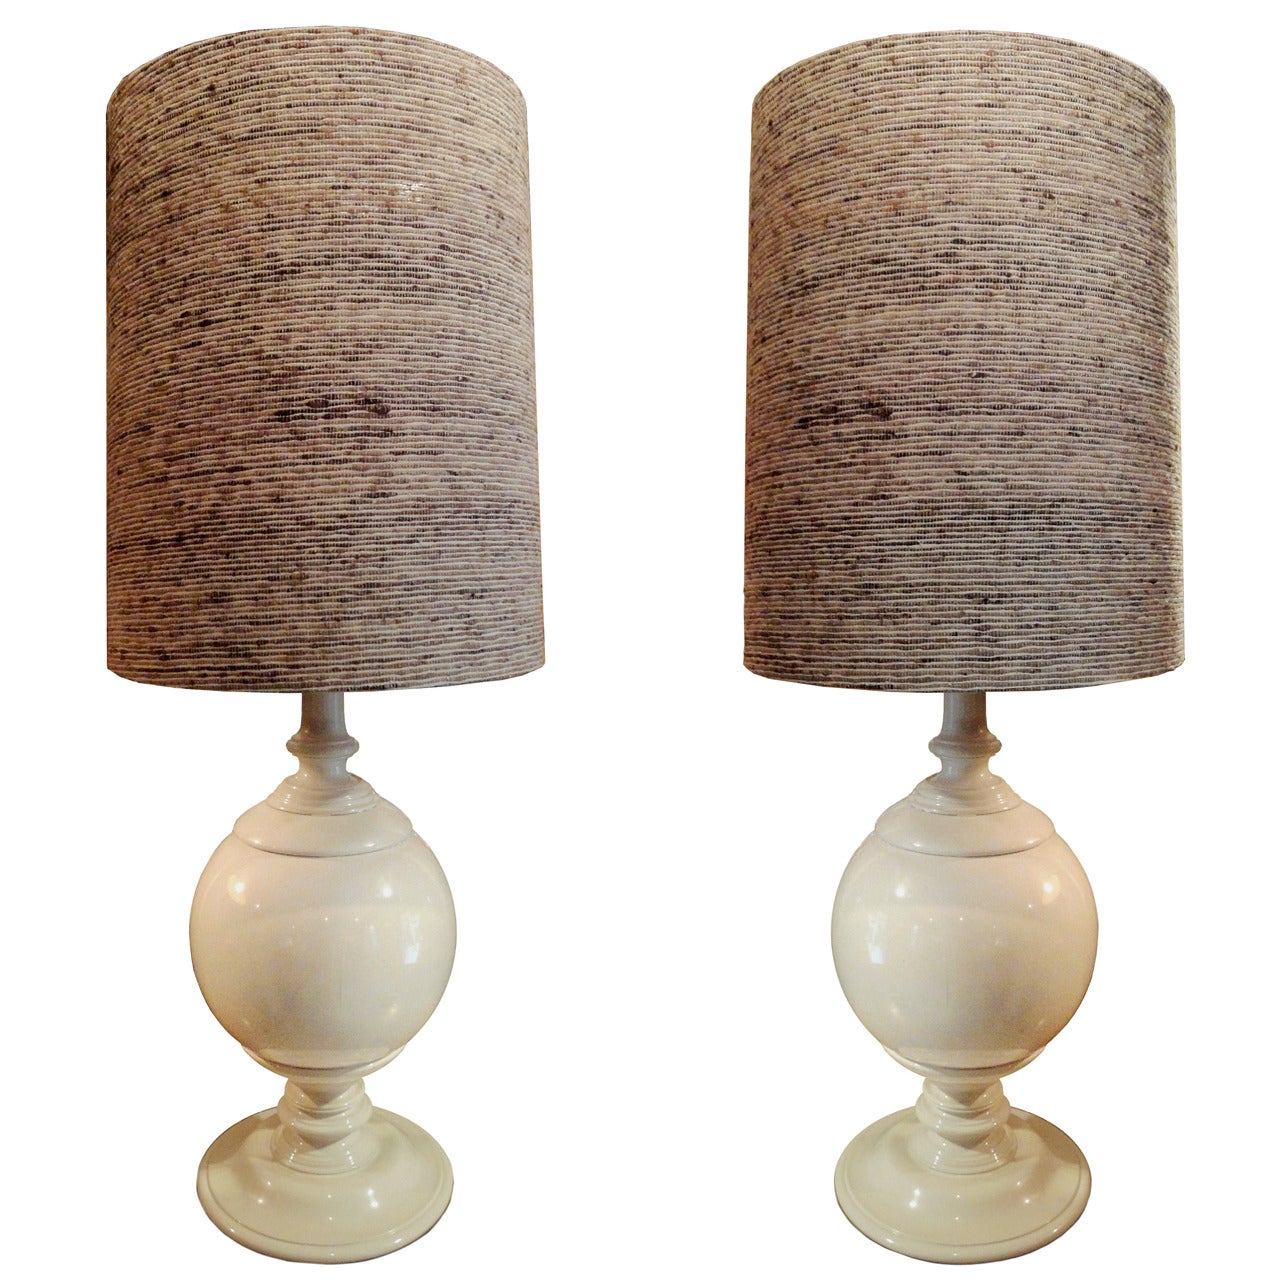 Pair of Large Table Lamps